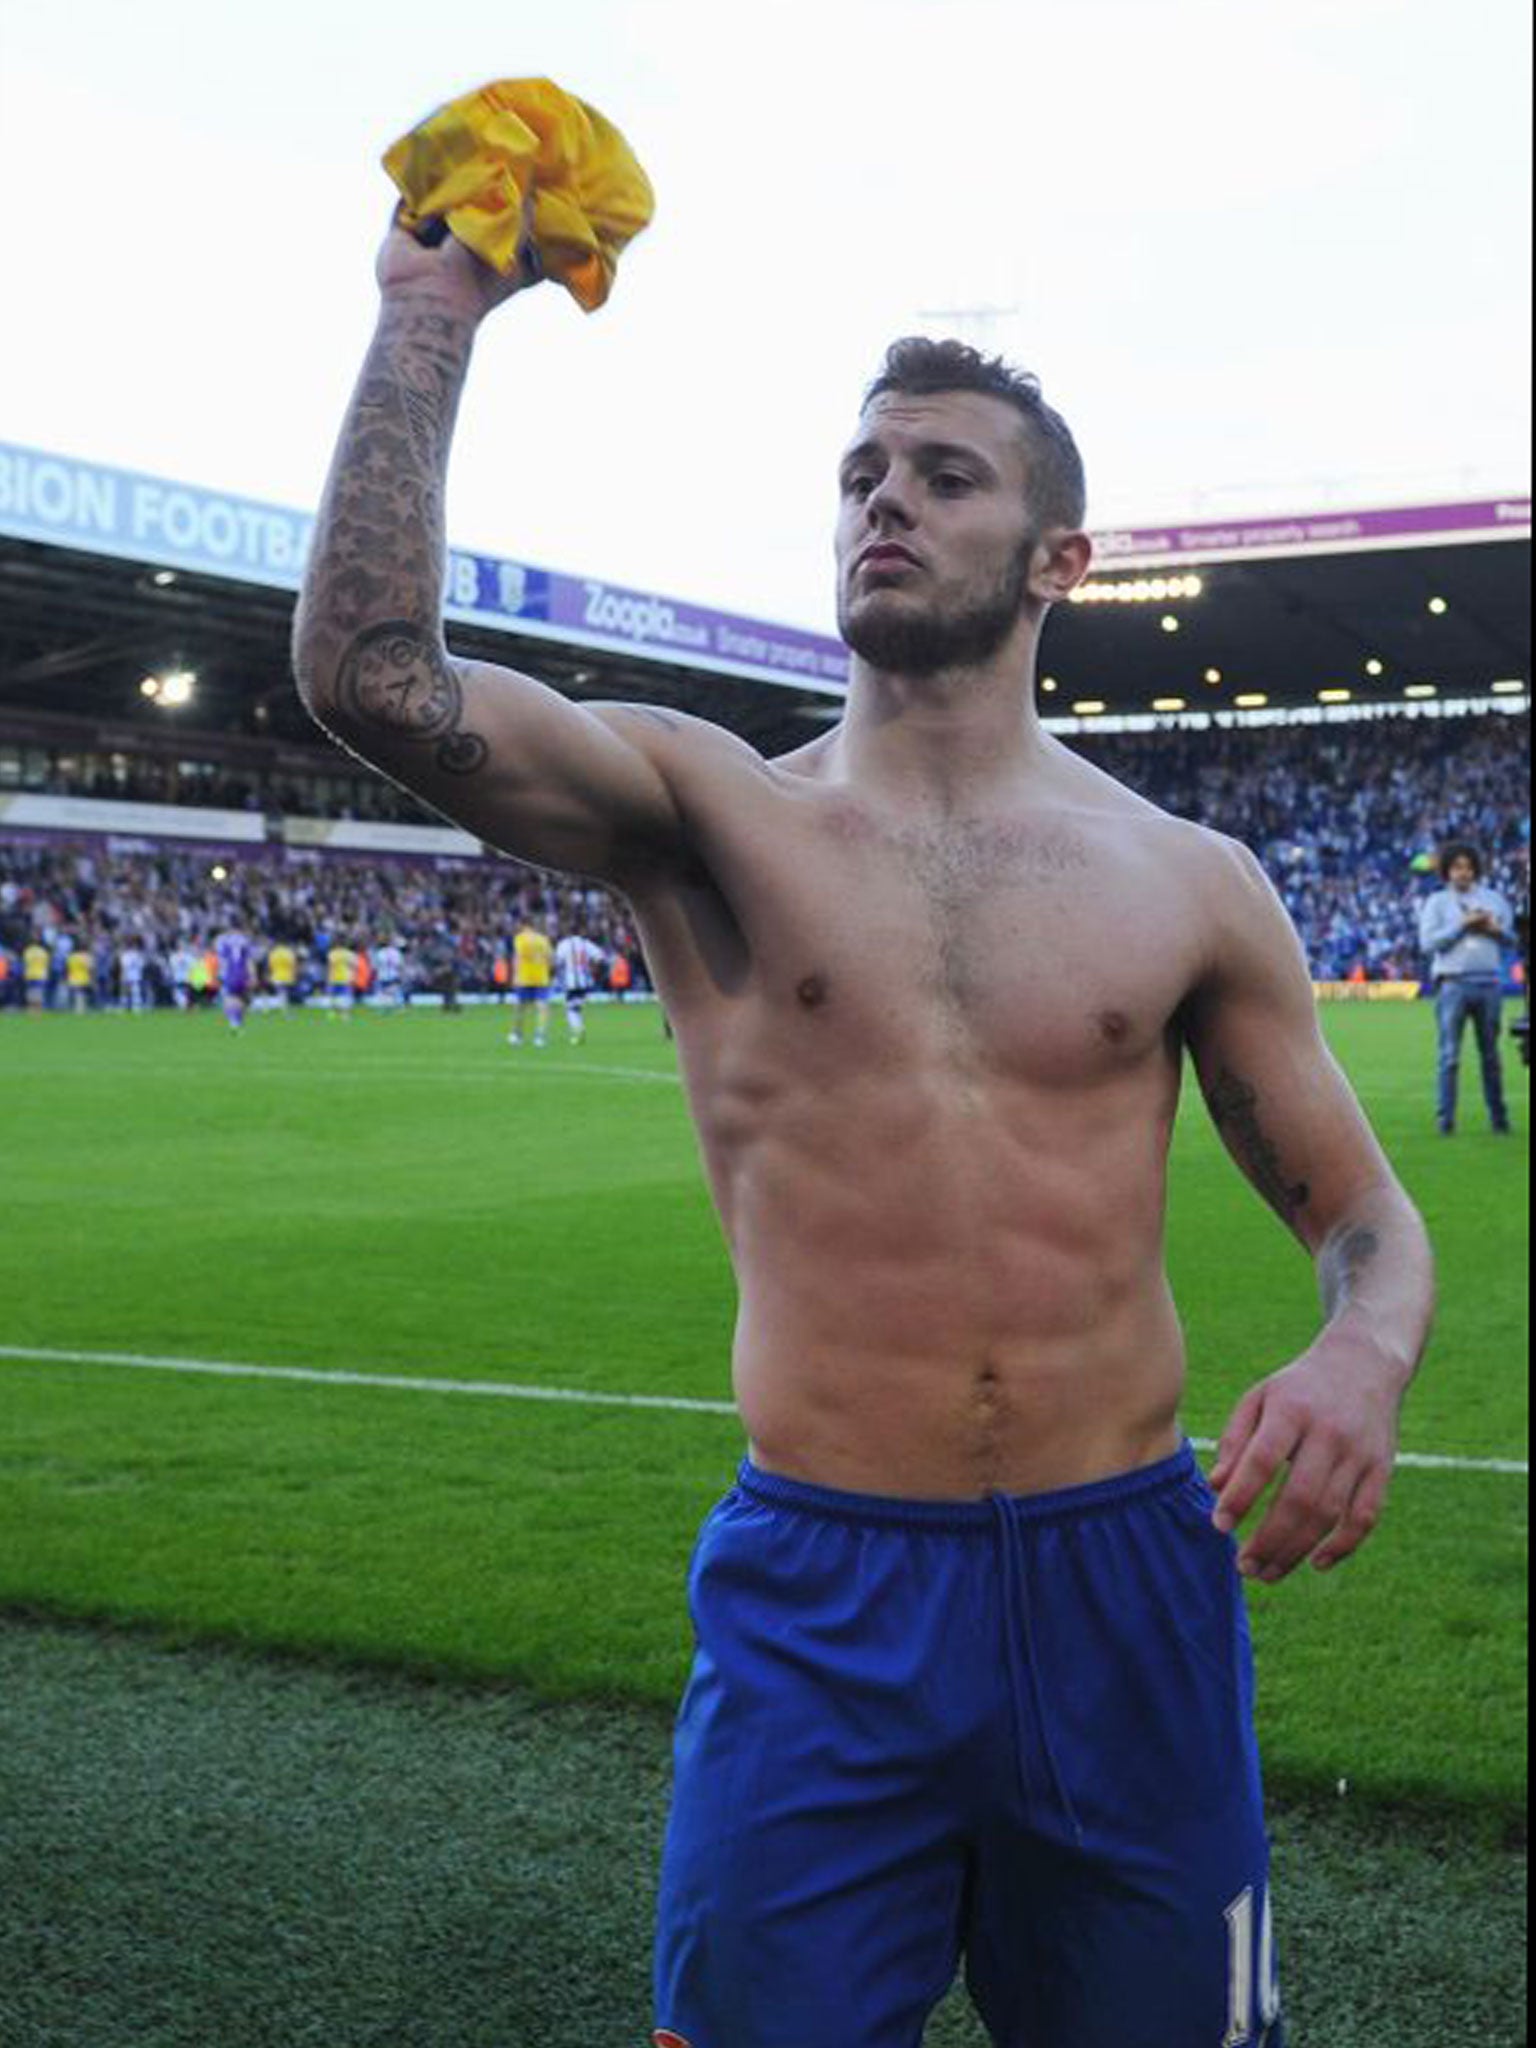 Jack Wilshere throws his shirt into the crowd at The Hawthorns on Sunday